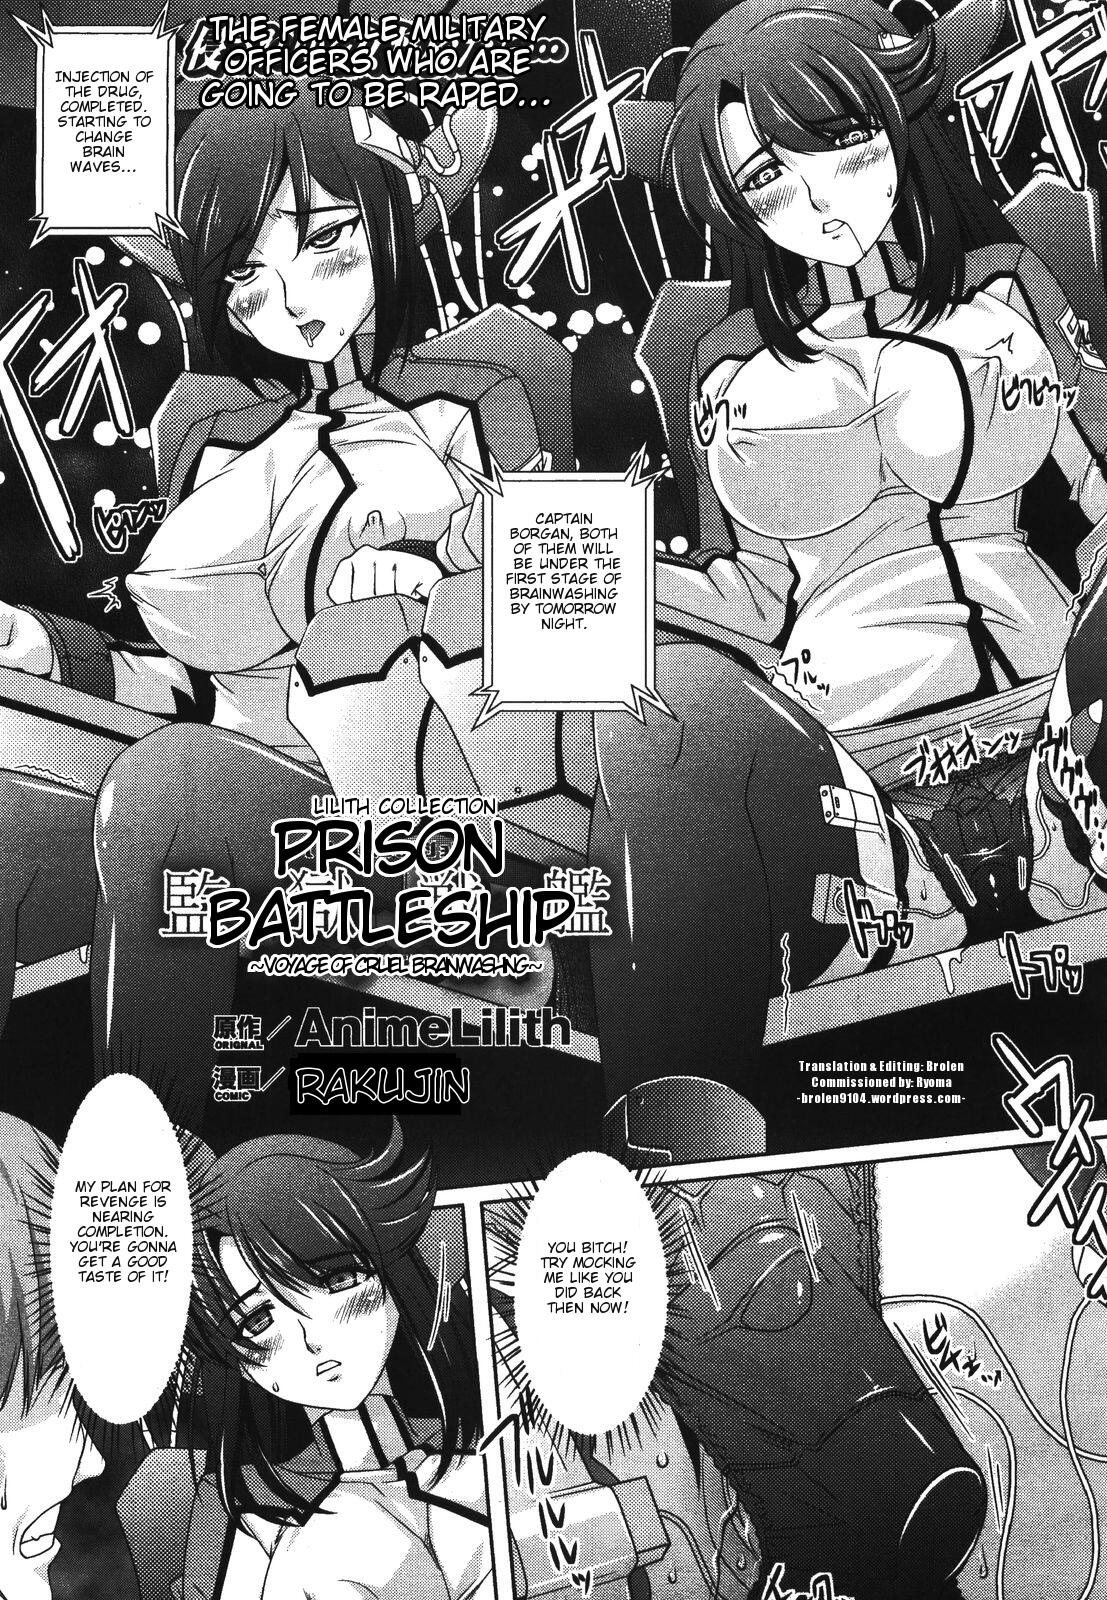 Hentai Babes Brain Injection - Prison Battleship - Busty military girls are given potion and used as  gangbang slave whores - 14 Pics | Hentai City